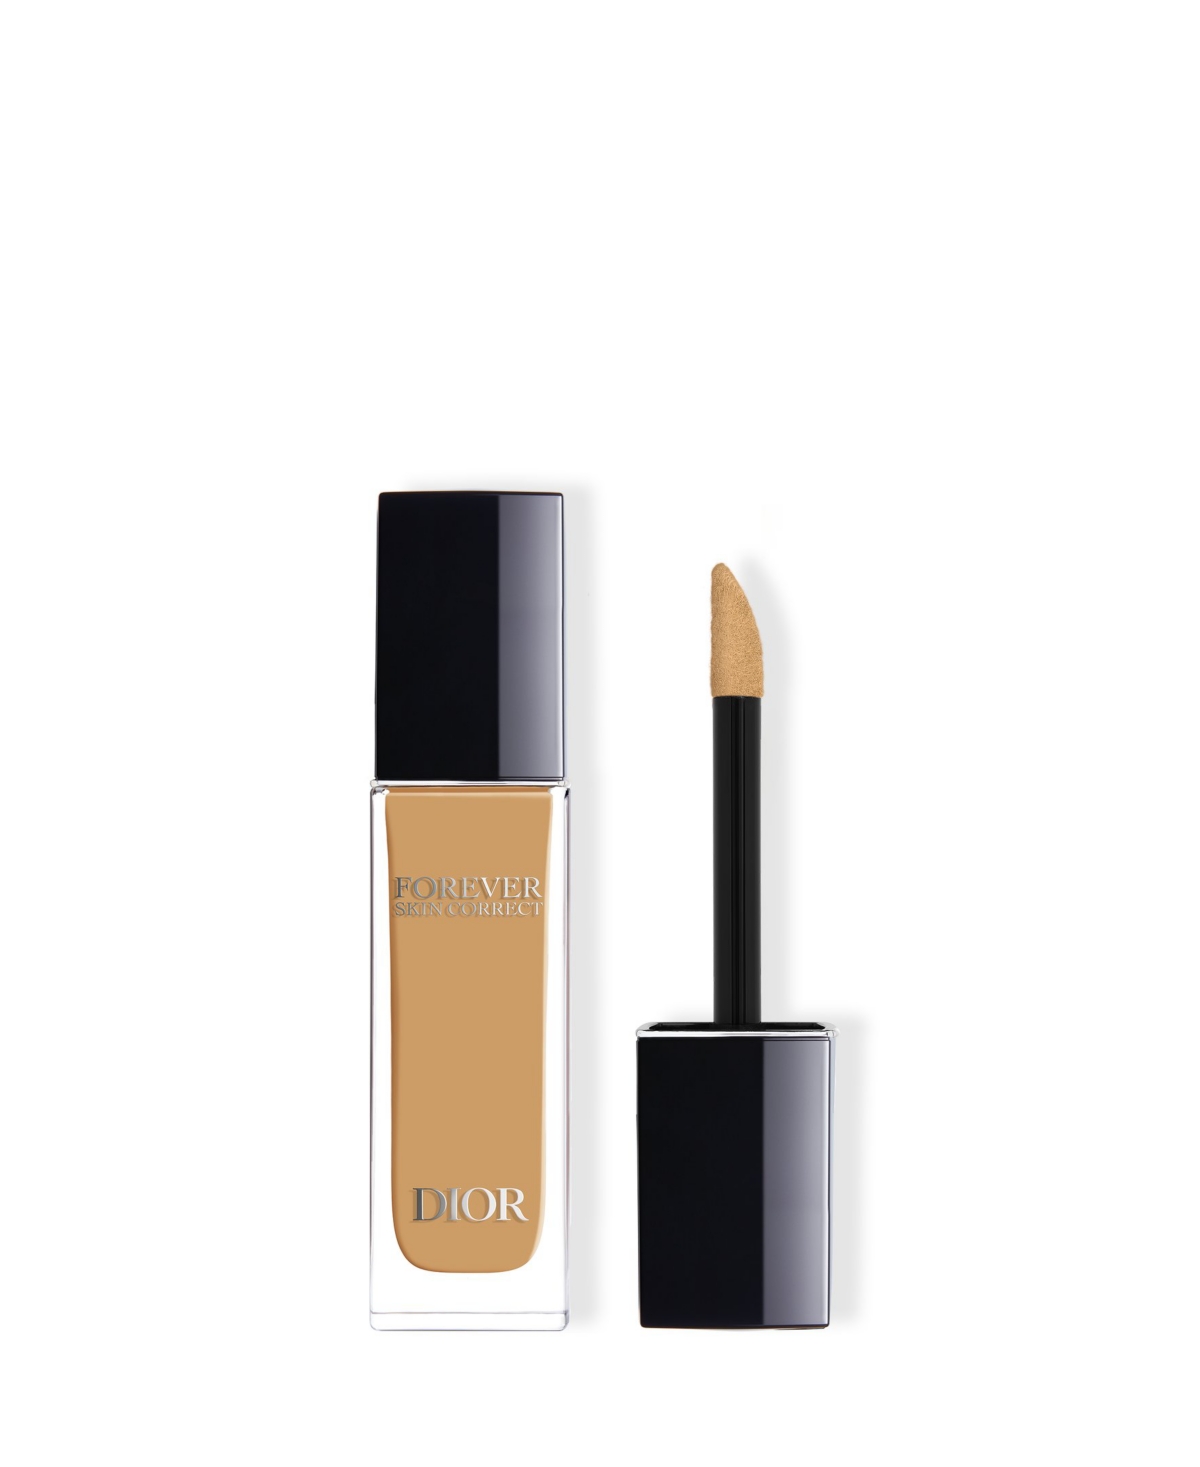 Dior Forever Skin Correct Full-coverage Concealer In Wo Warm Olive (medium Skin With Warm Oli